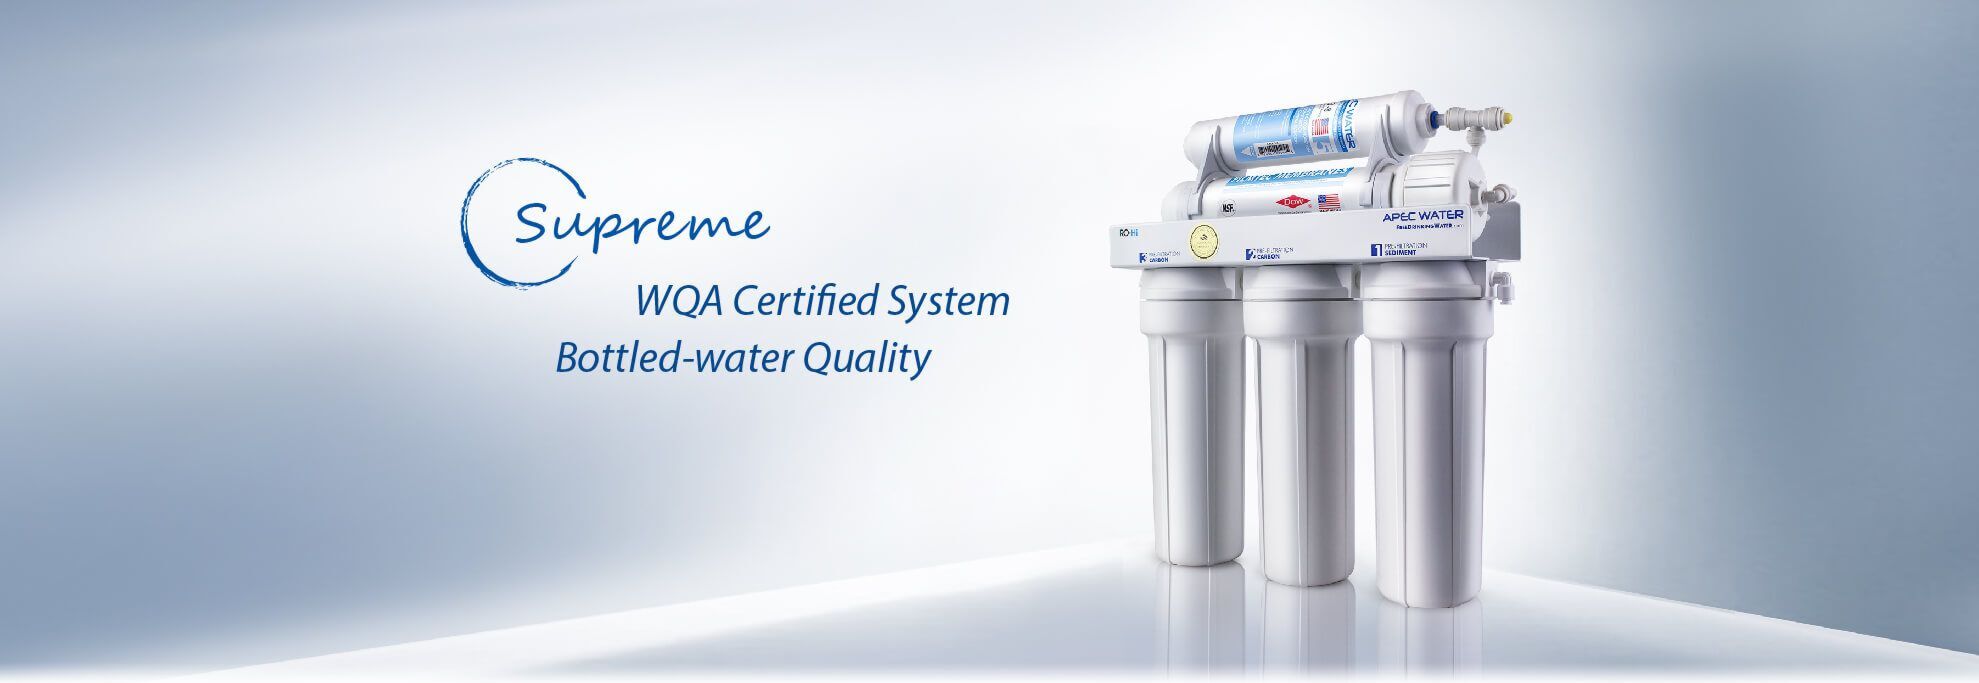 WQA Certified System Bottled-water Quality